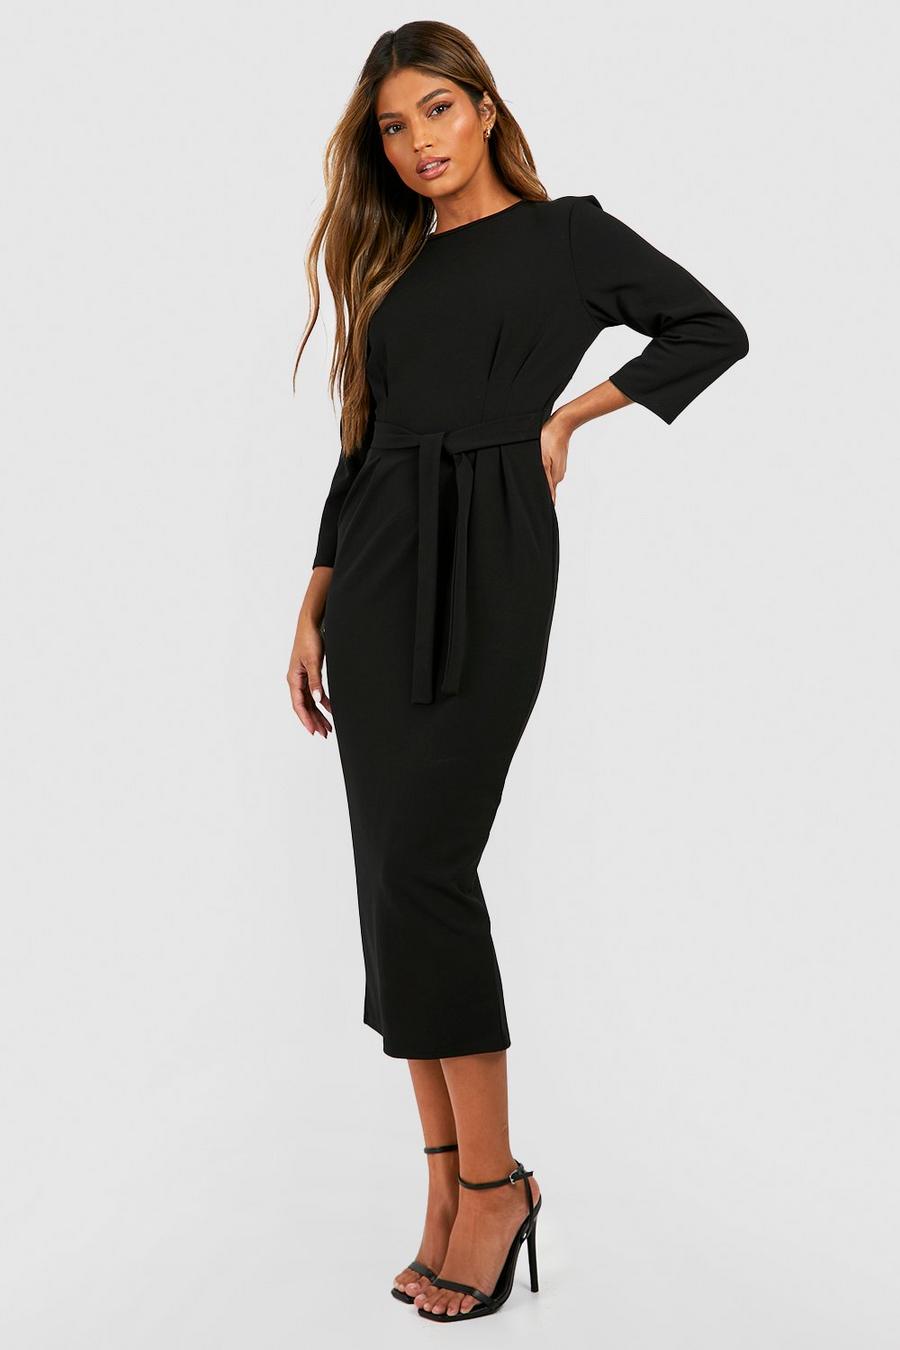 Black Crepe Pleat Front 3/4 Sleeve Belted Midaxi Dress